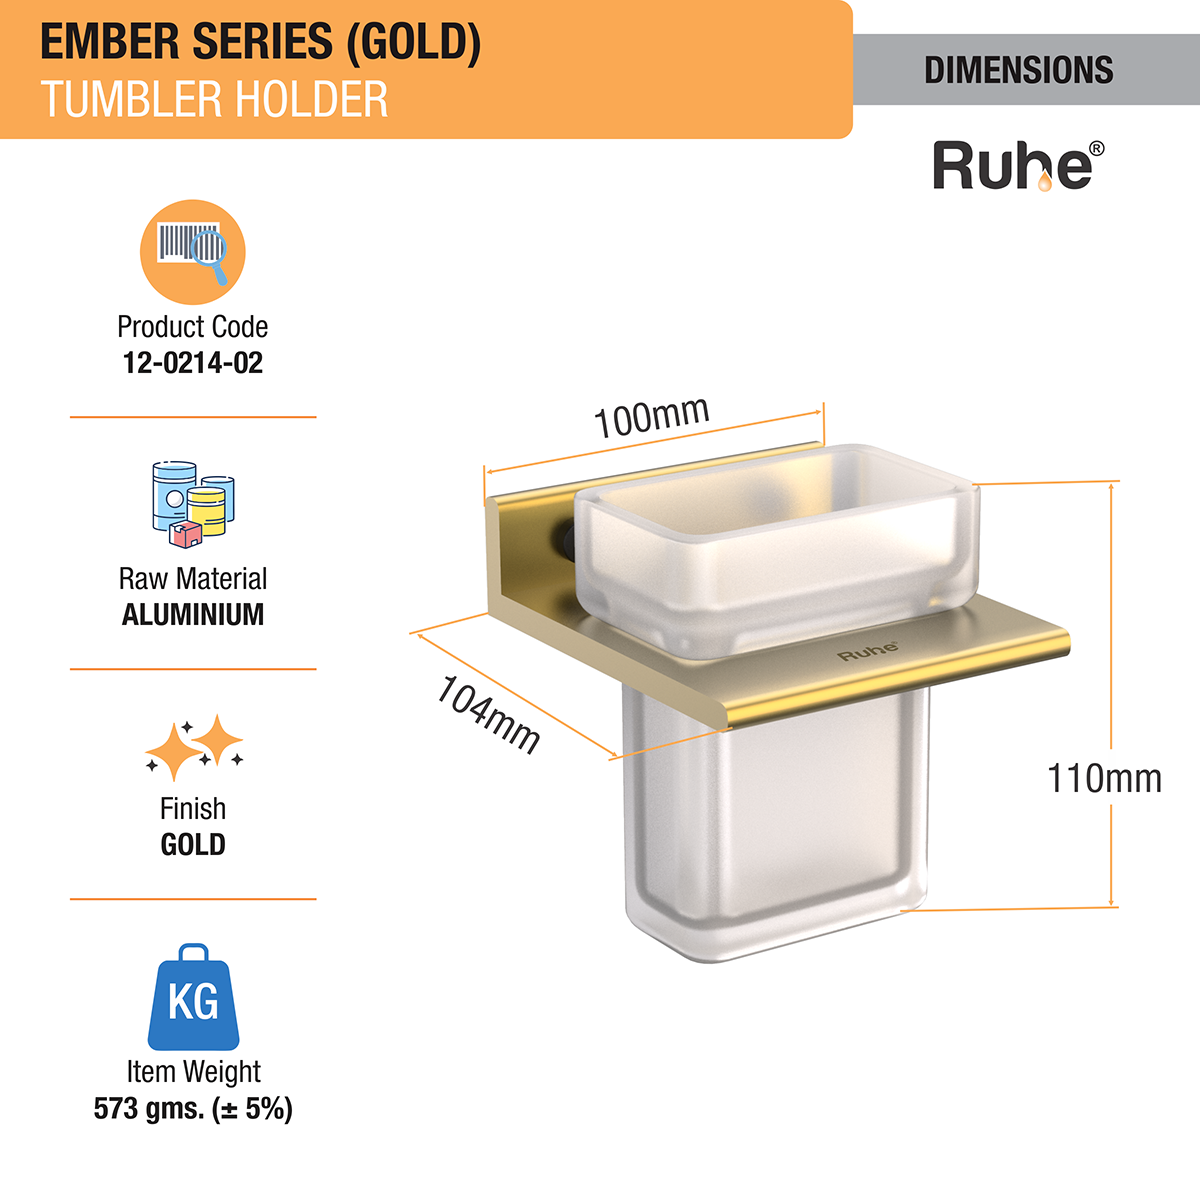 Ember Gold Tumbler Holder (Space Aluminium) dimensions and sizes